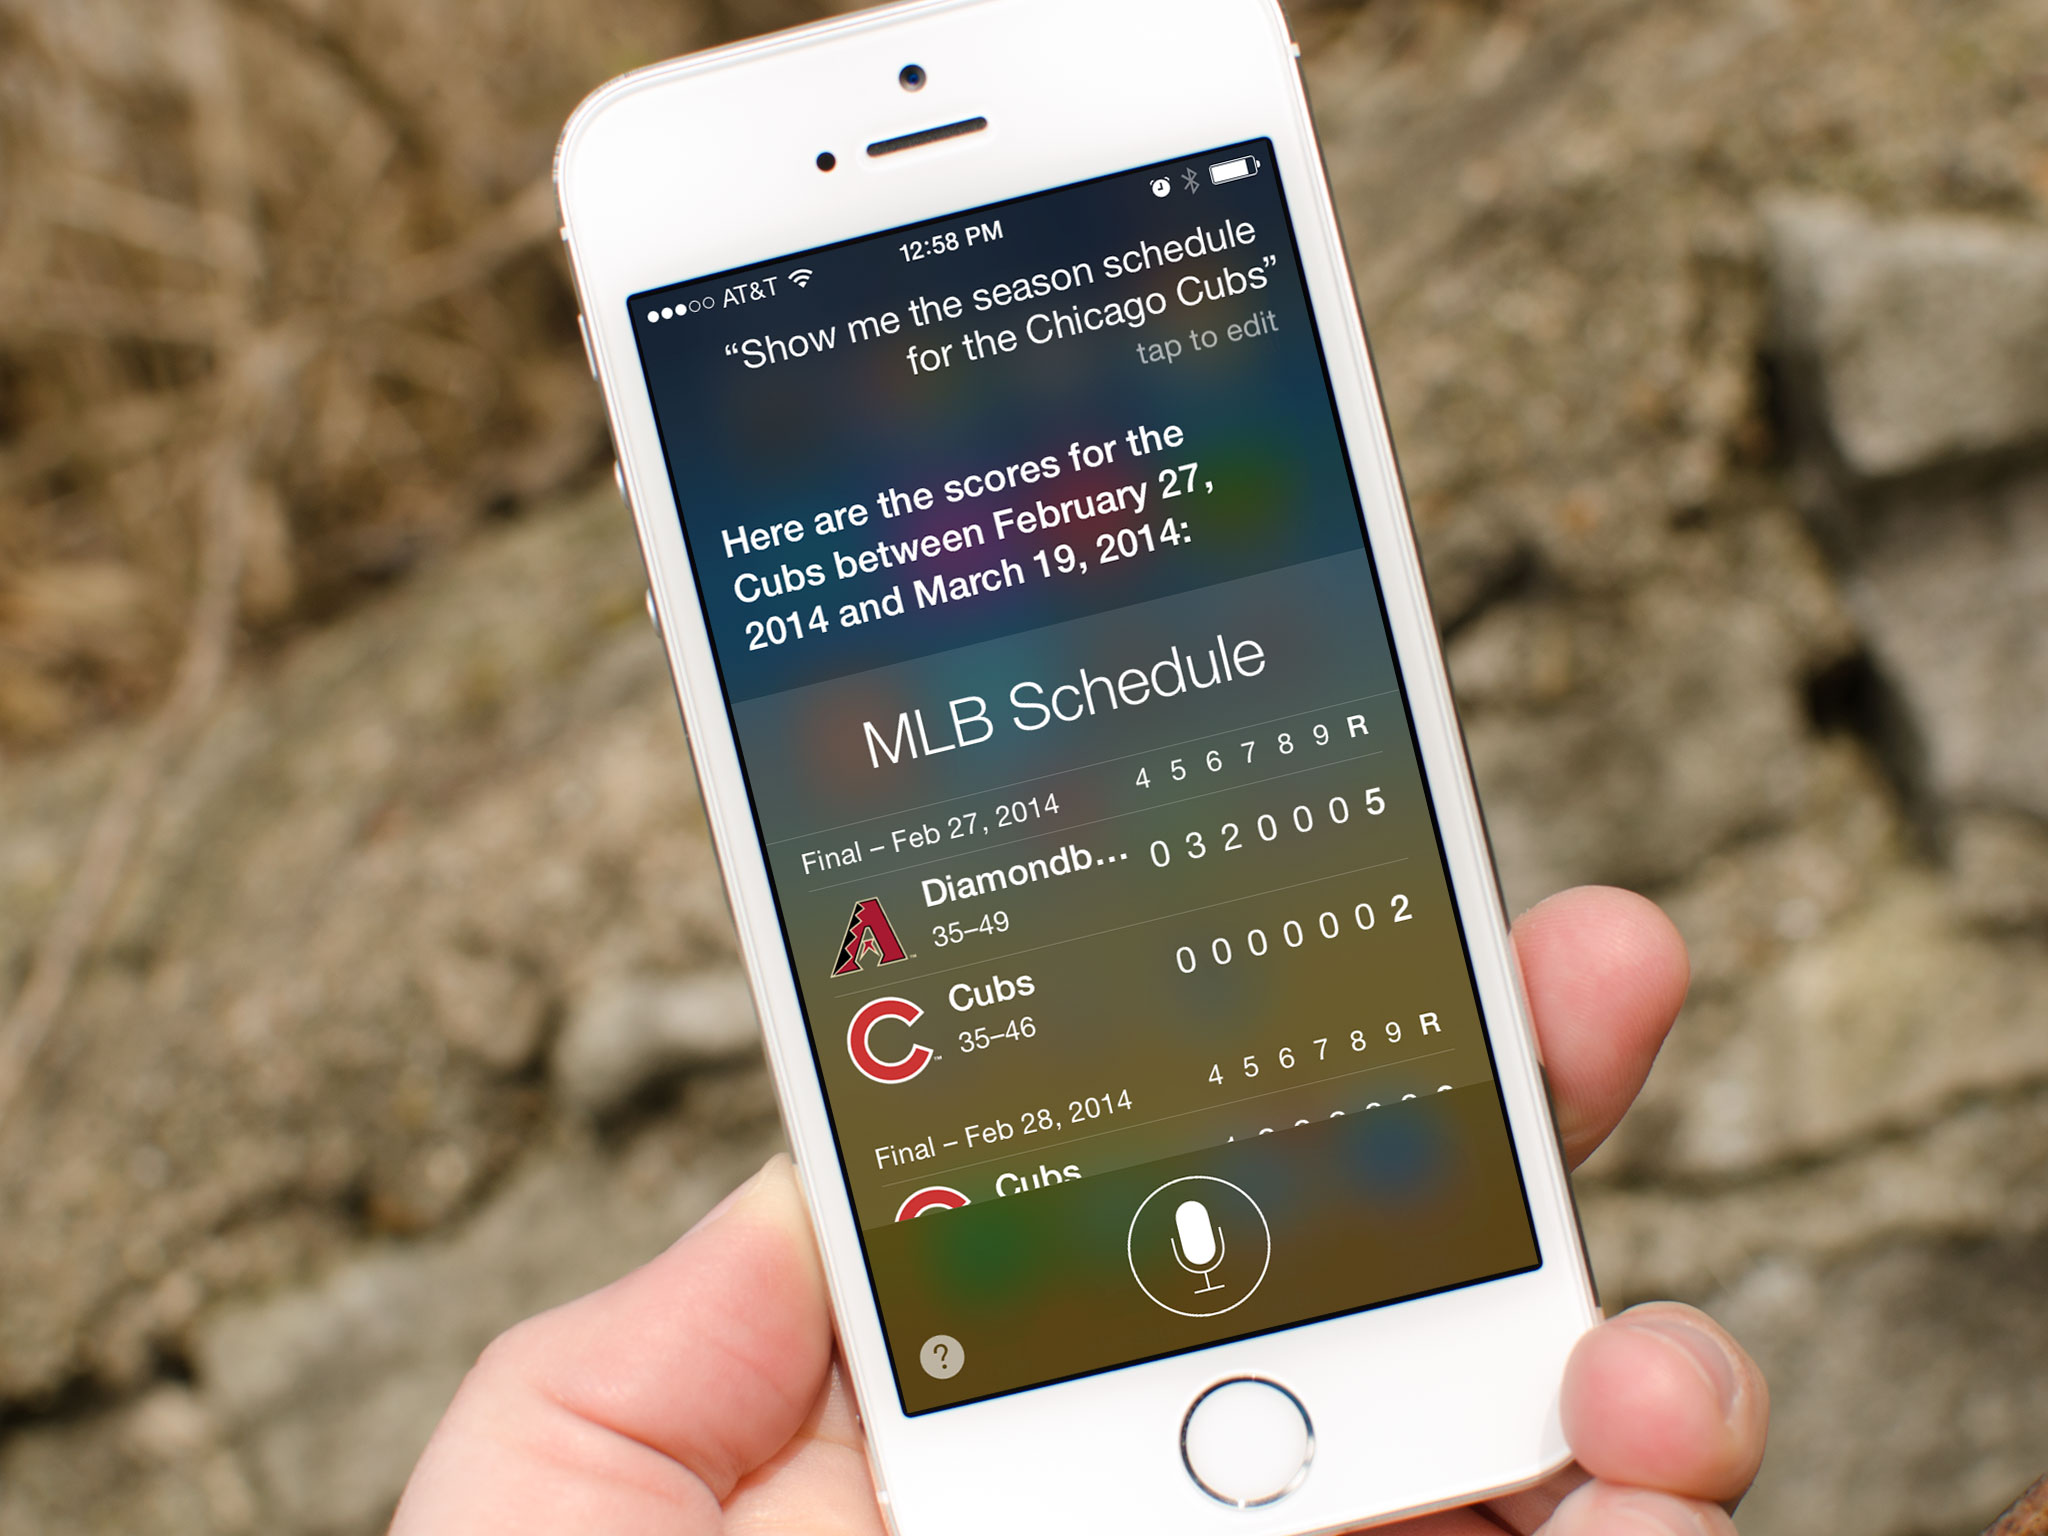 How to look up game schedules for your favorite sports teams with Siri